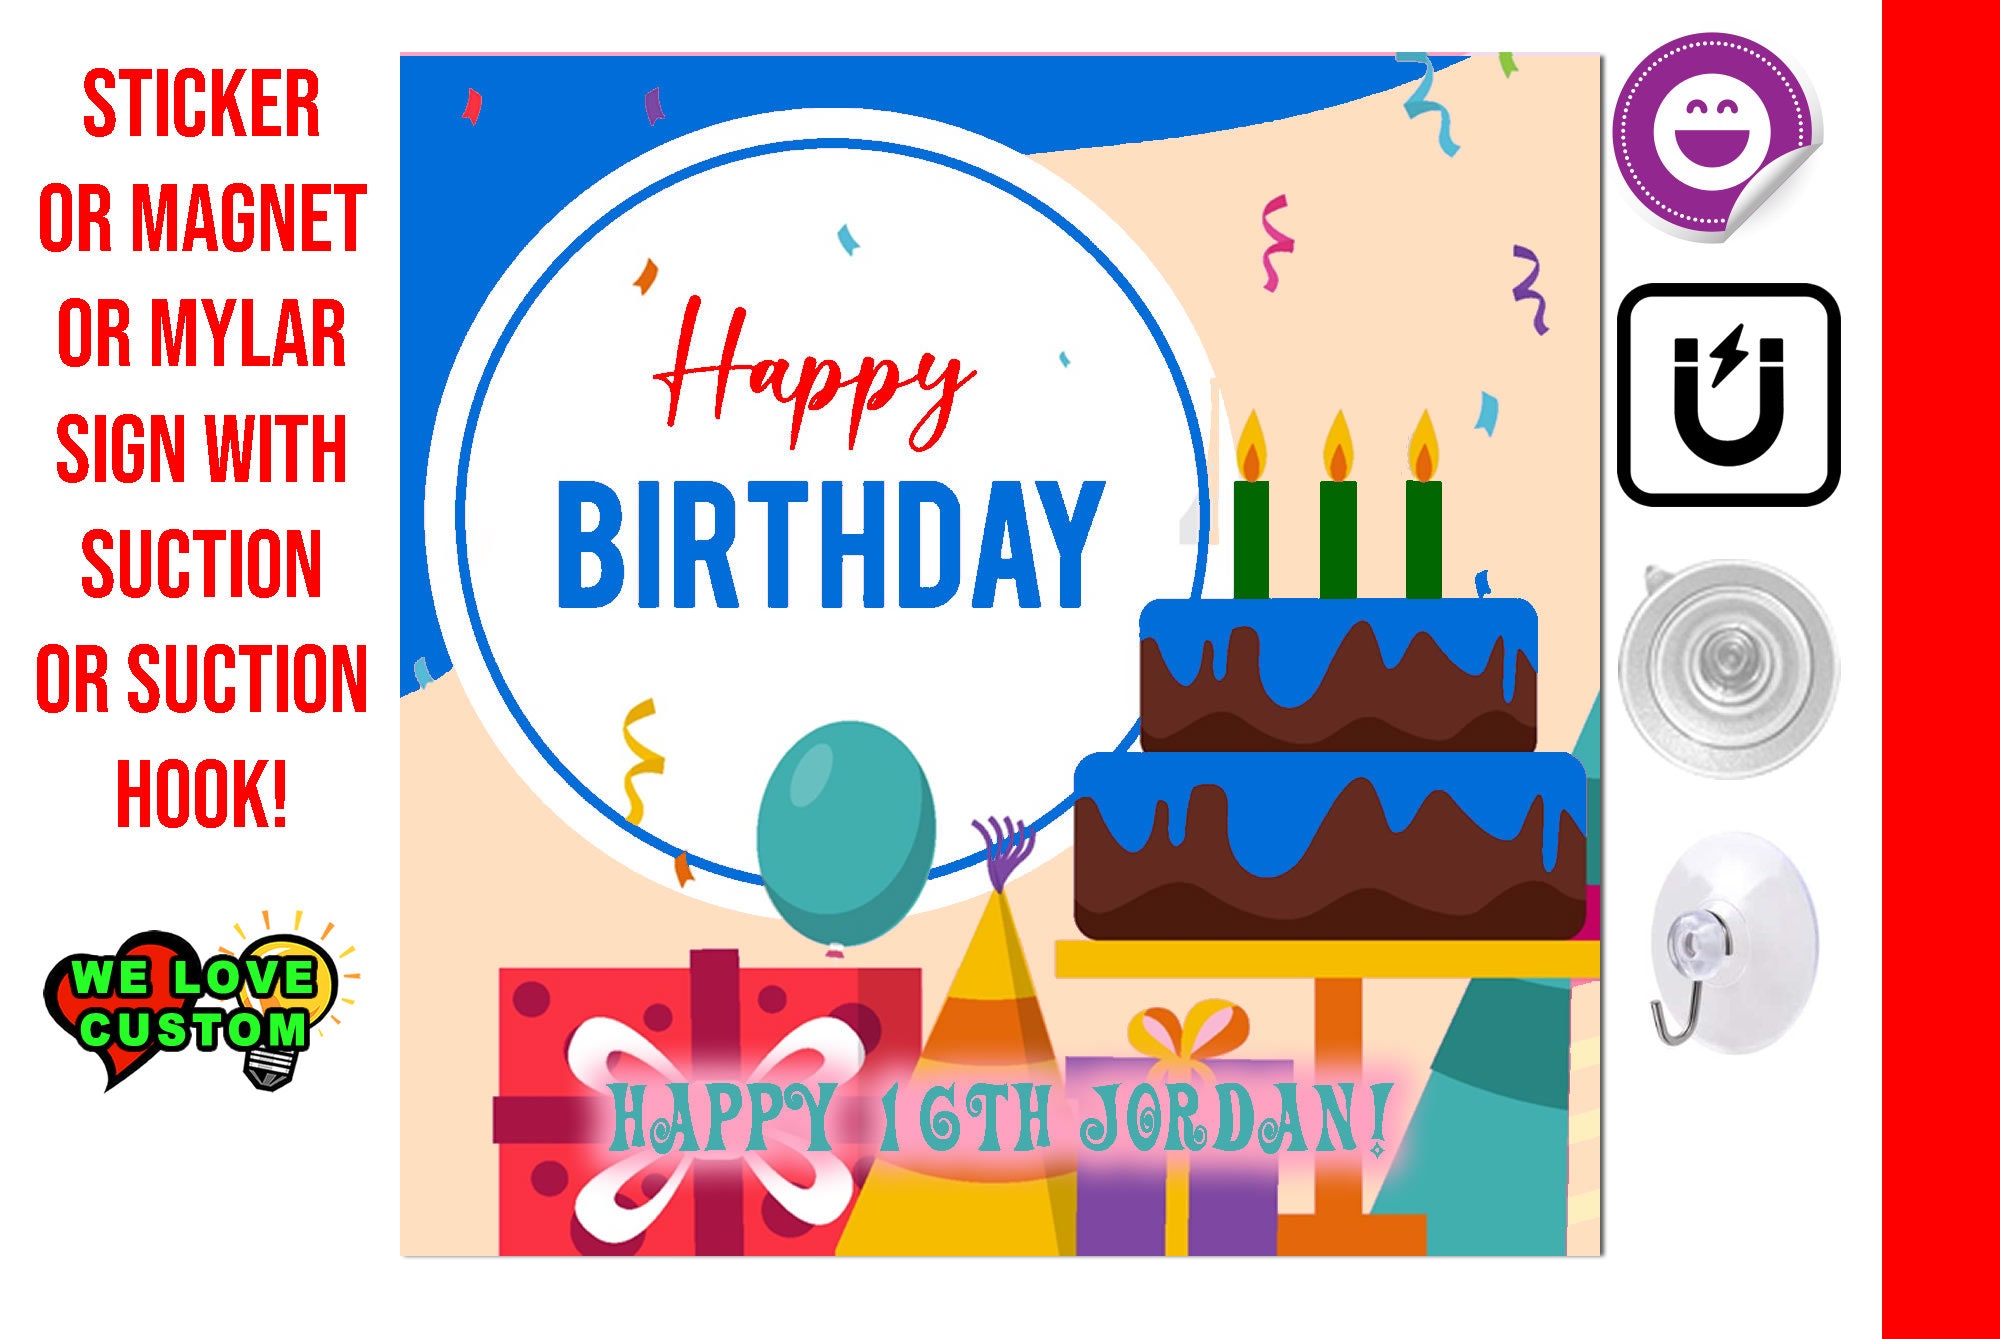 Personalized Happy Birthday Sticker or Magnet or Mylar Sign With Suction/Grommets For Long Life Strong Hold Various Sizes